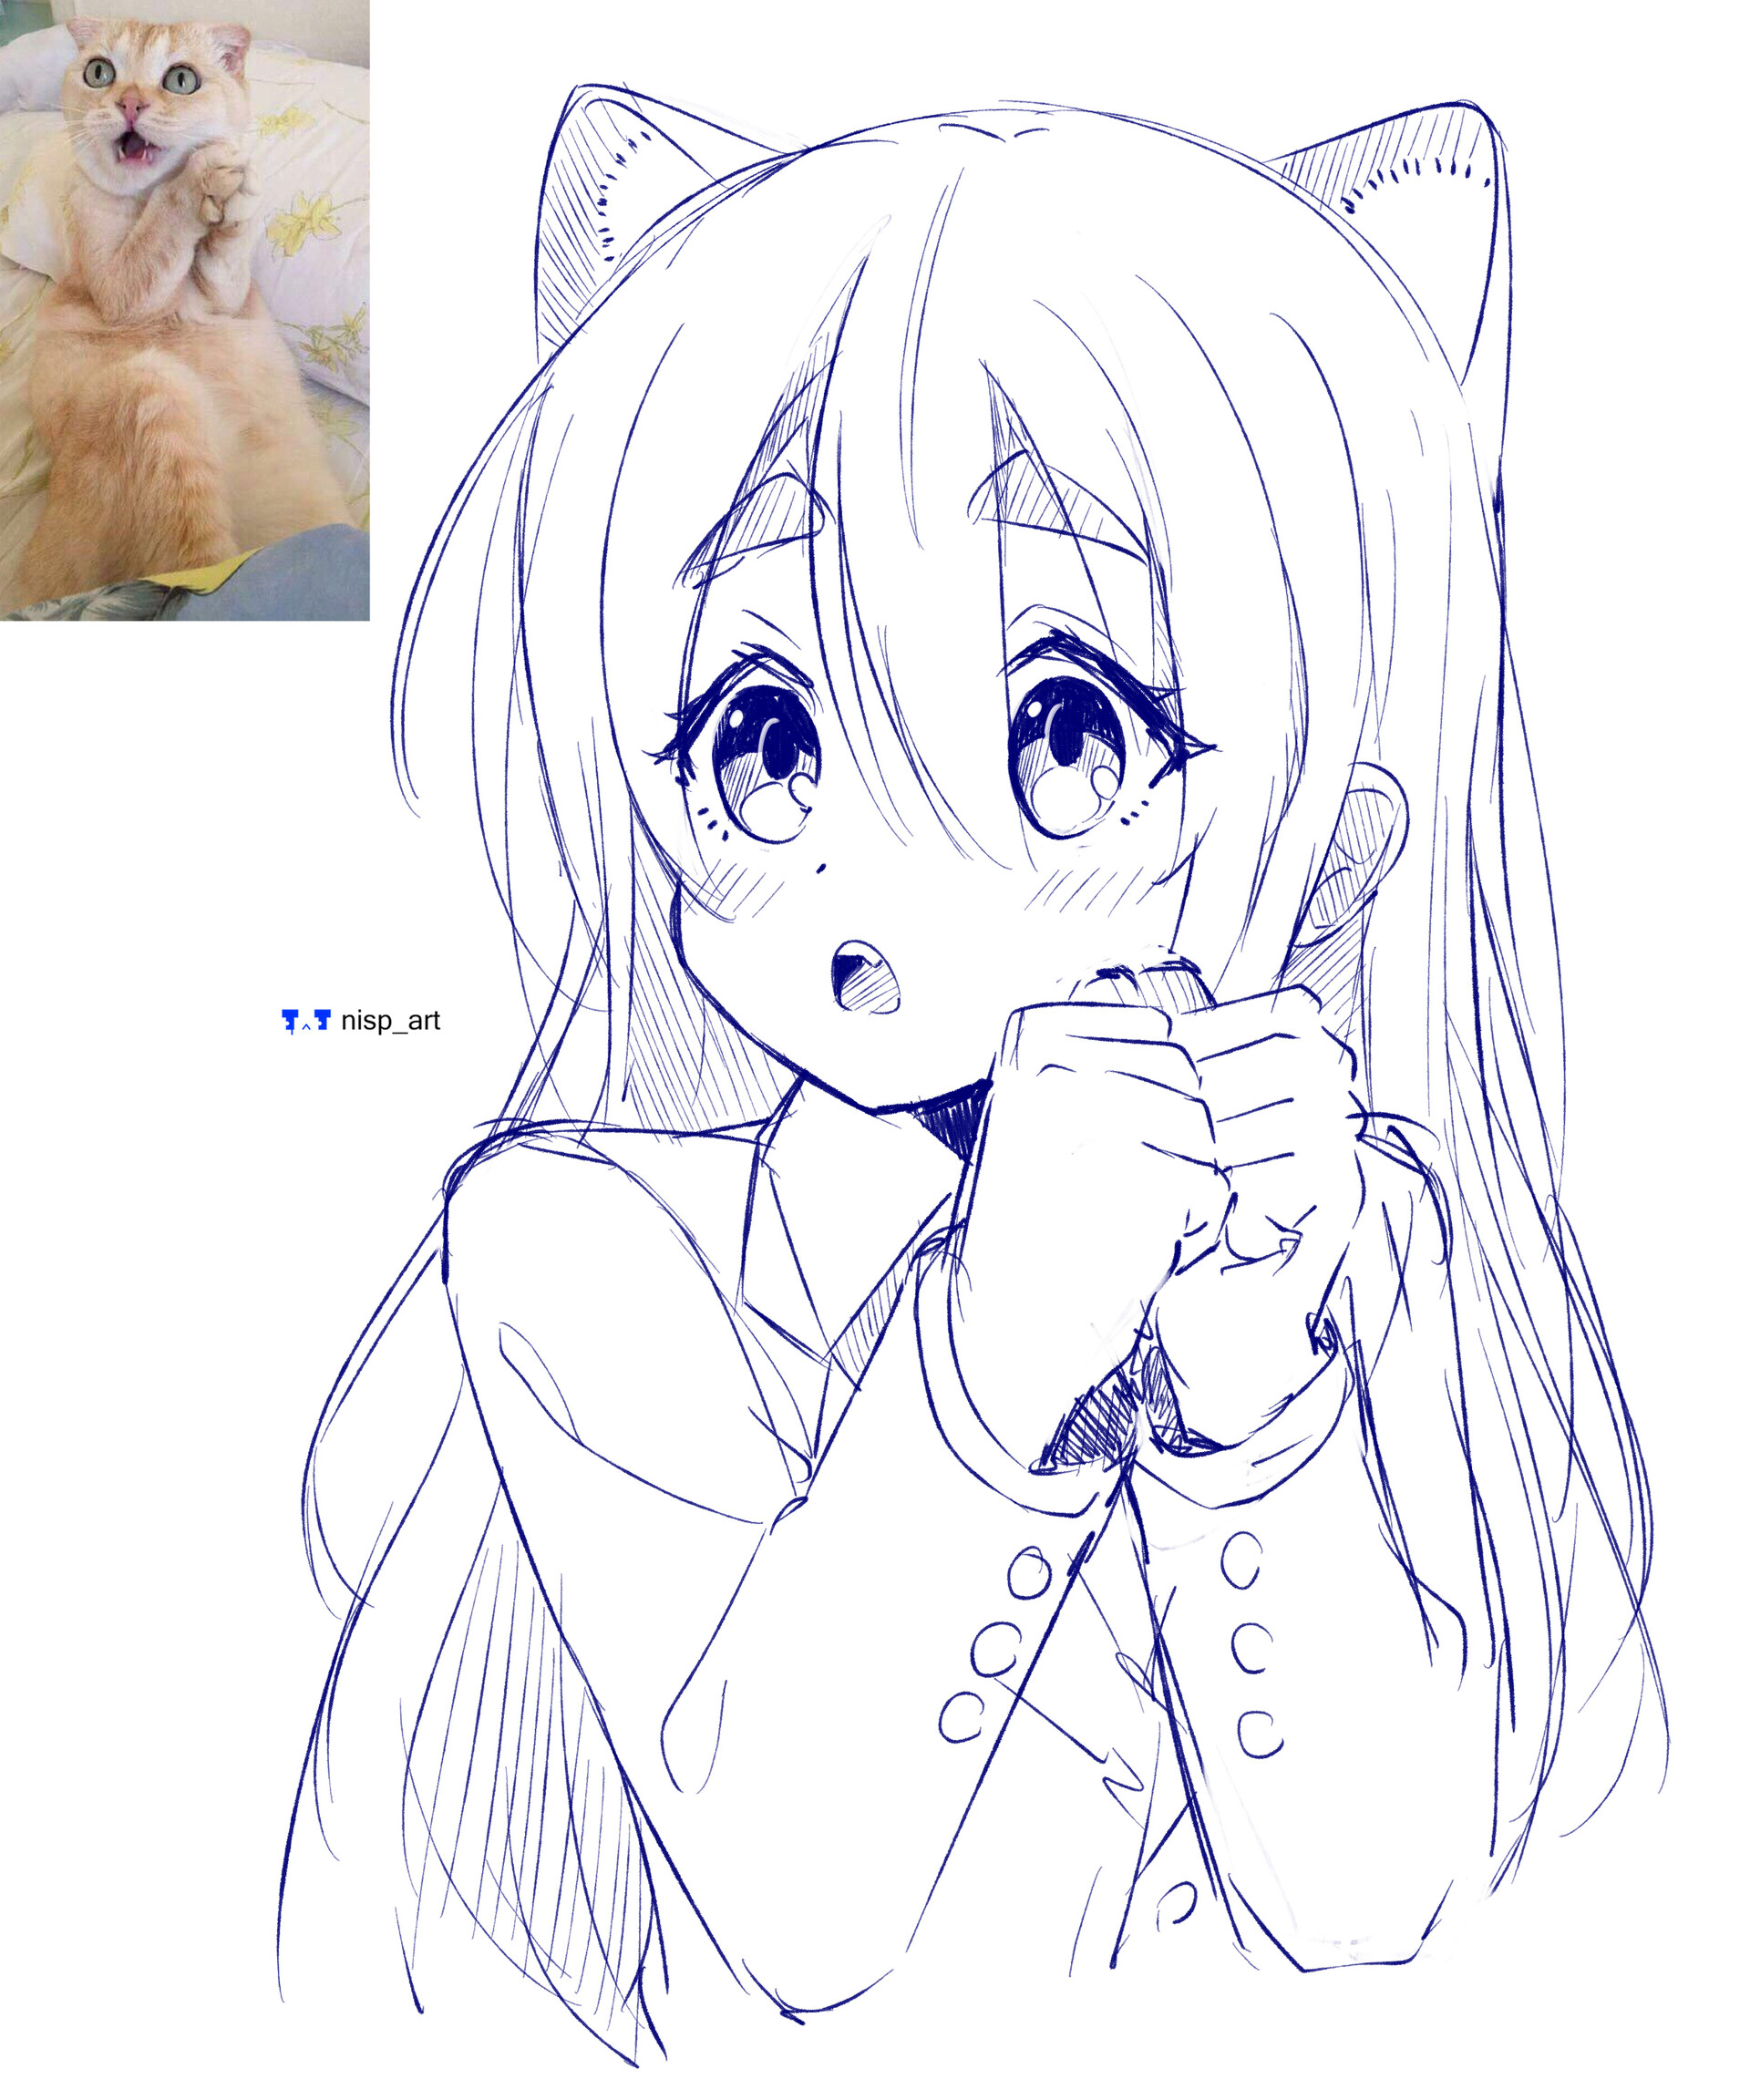 How to Draw an Anime Cat  Easy Step by Step Tutorial